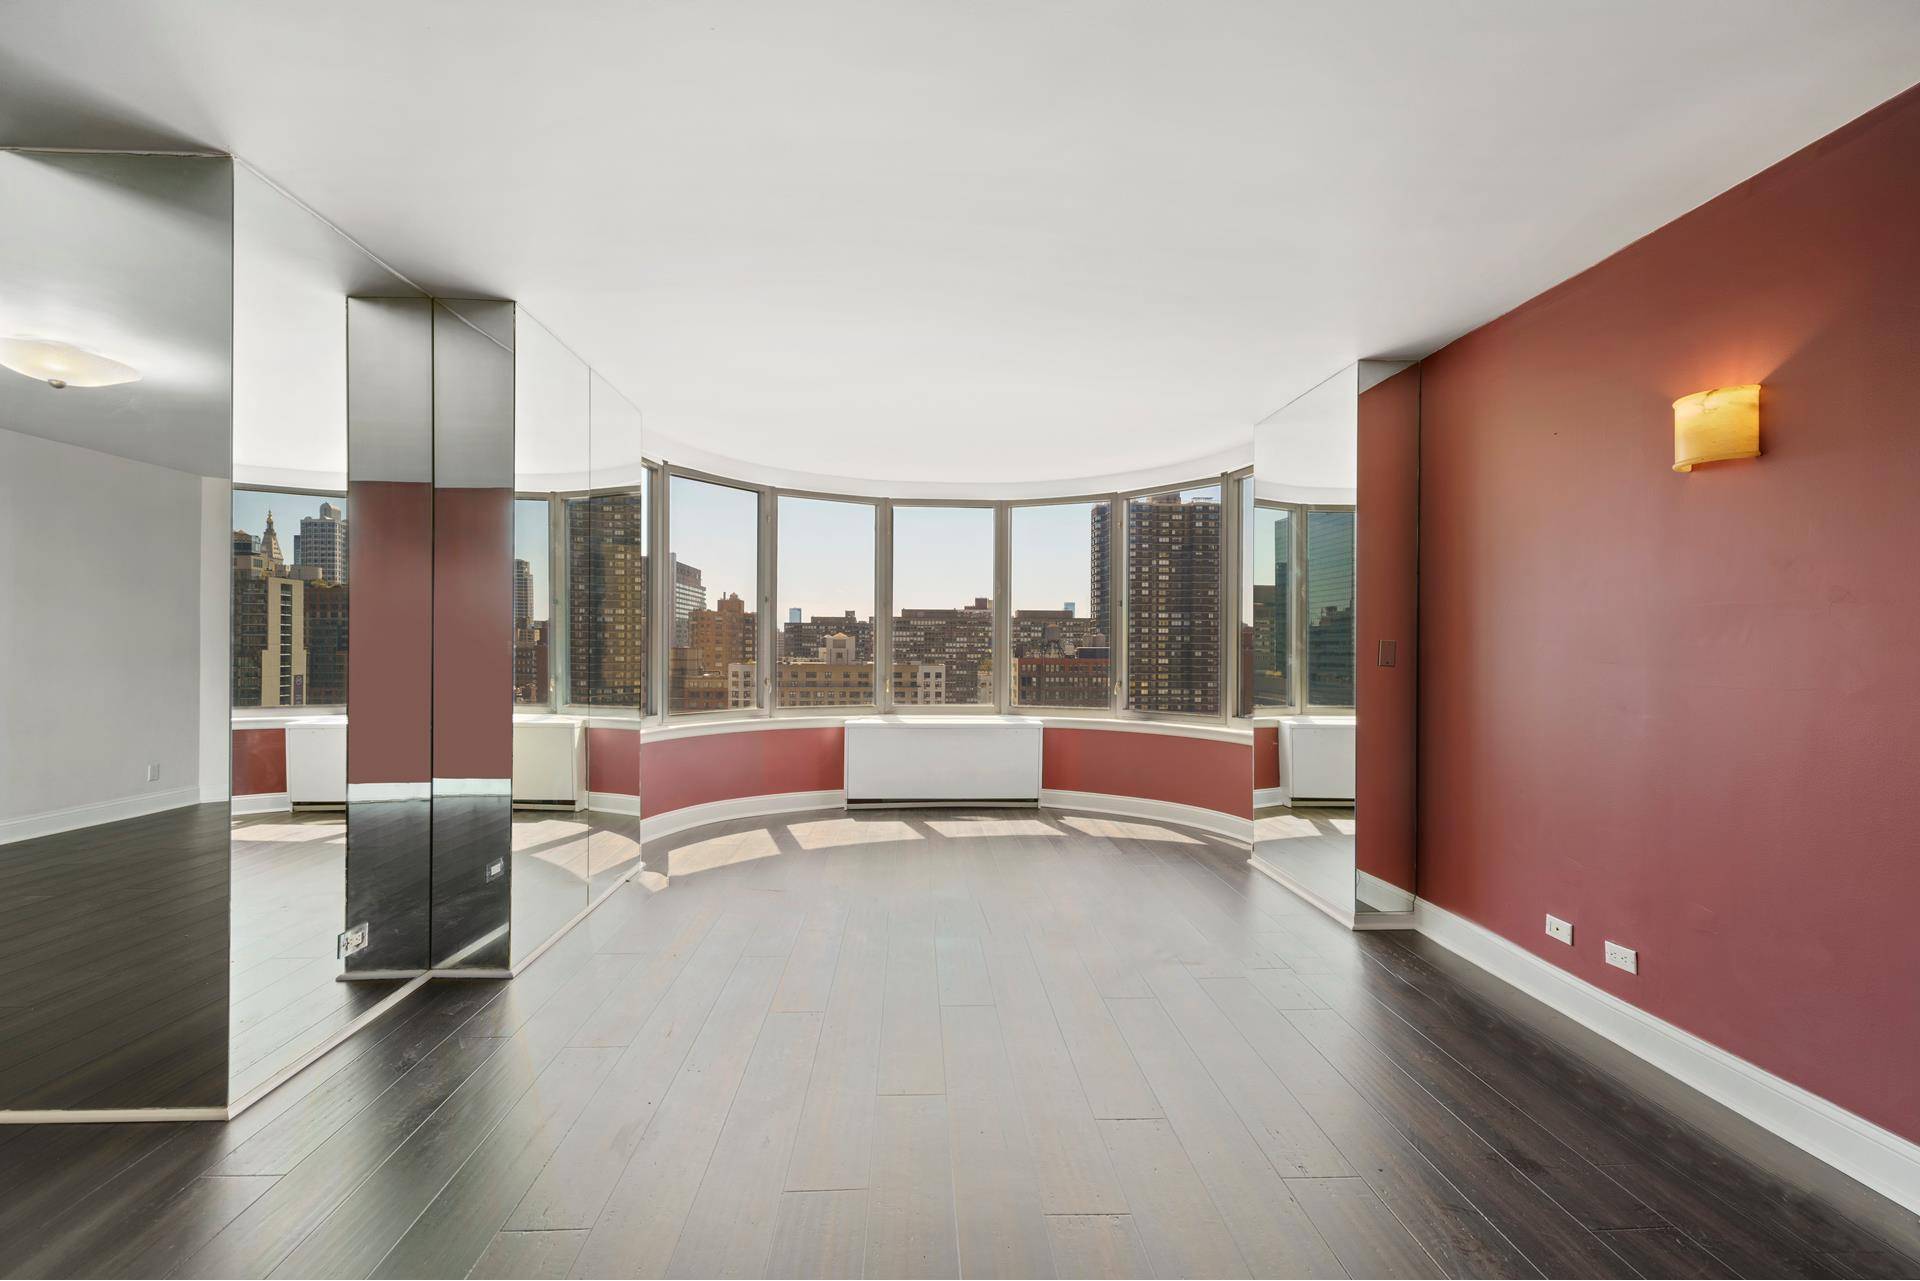 Welcome to the Corinthian at 330 East 38th Street, Unit 18AQ This sun flooded 2 bedroom easily converted into a 3 bedroom condo offers breathtaking river and skyline views.